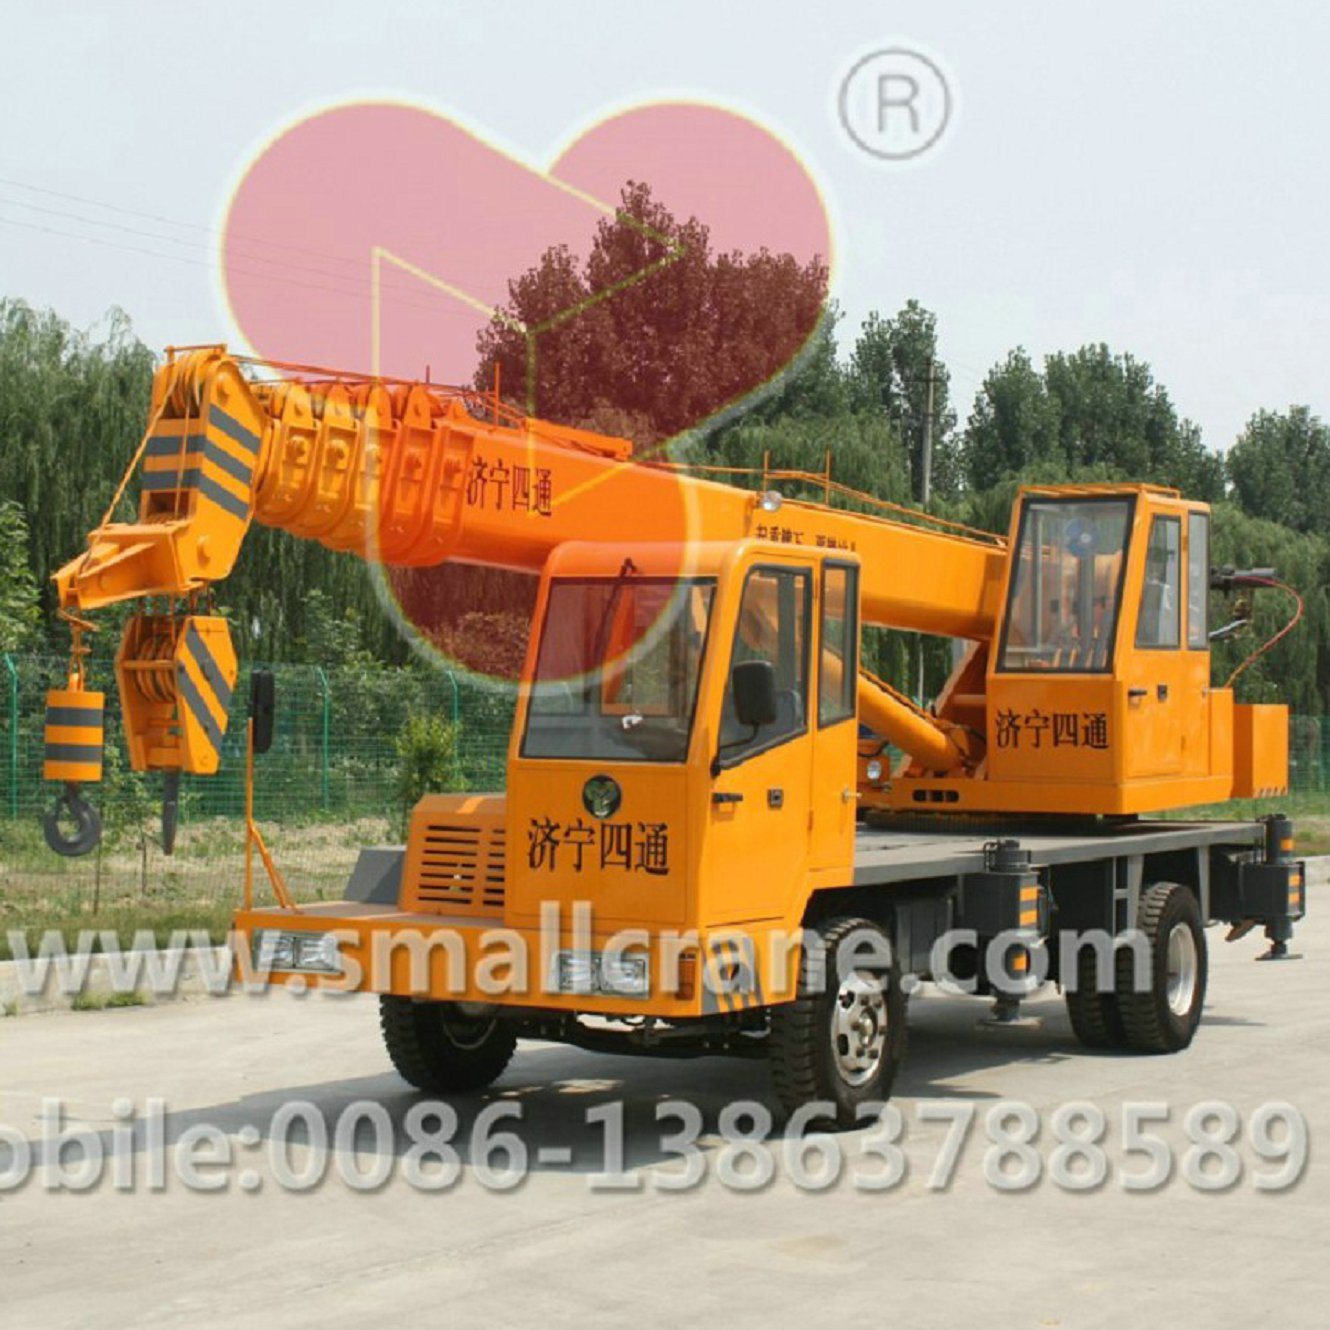 Cheap 10 Ton Small Mobile Truck Crane From Jining Sitong